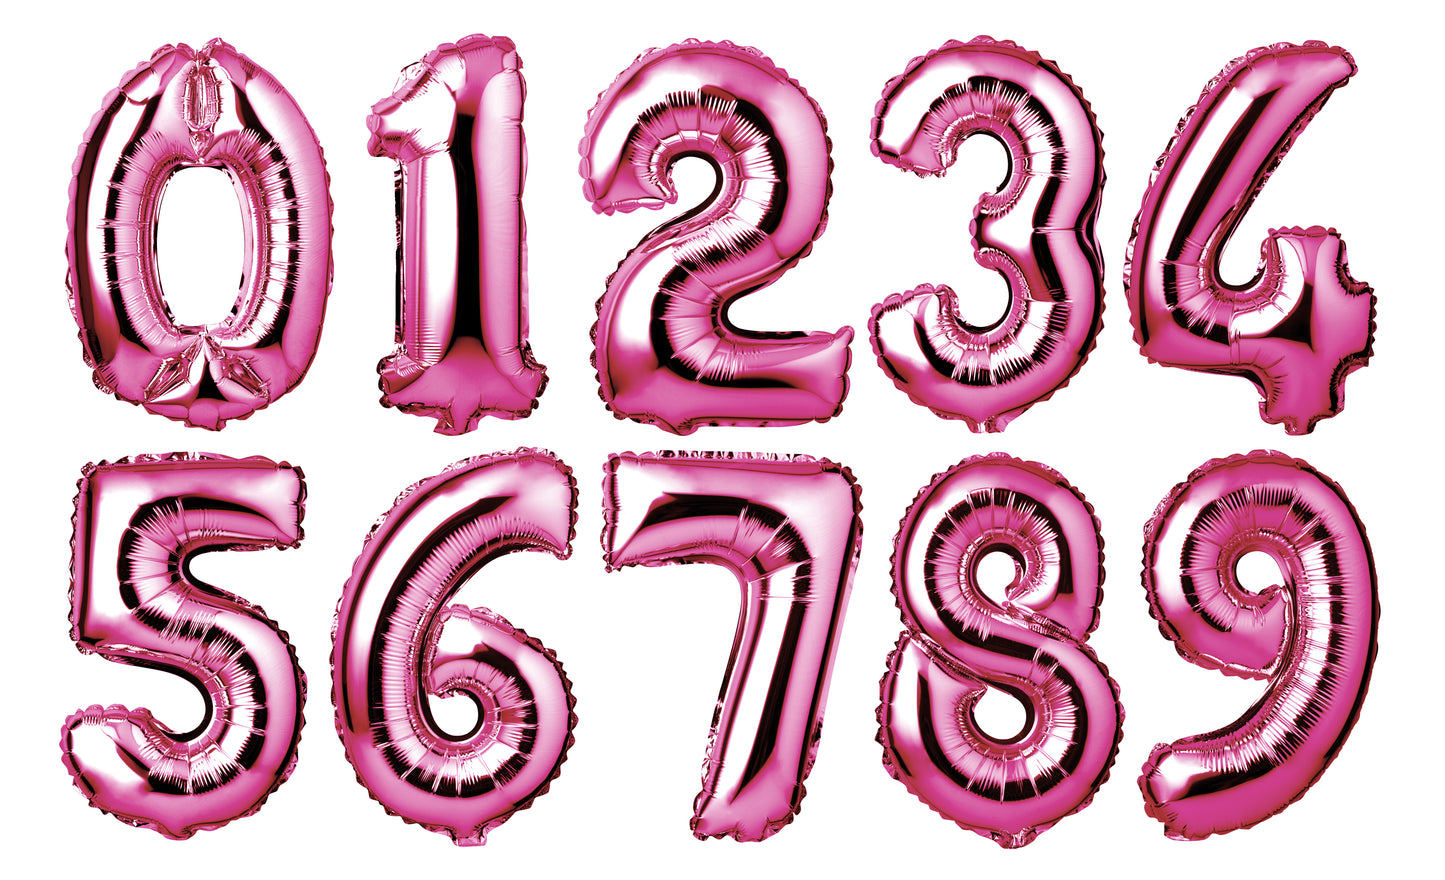 34" Giant Foil Hot Pink Number 0 Balloon